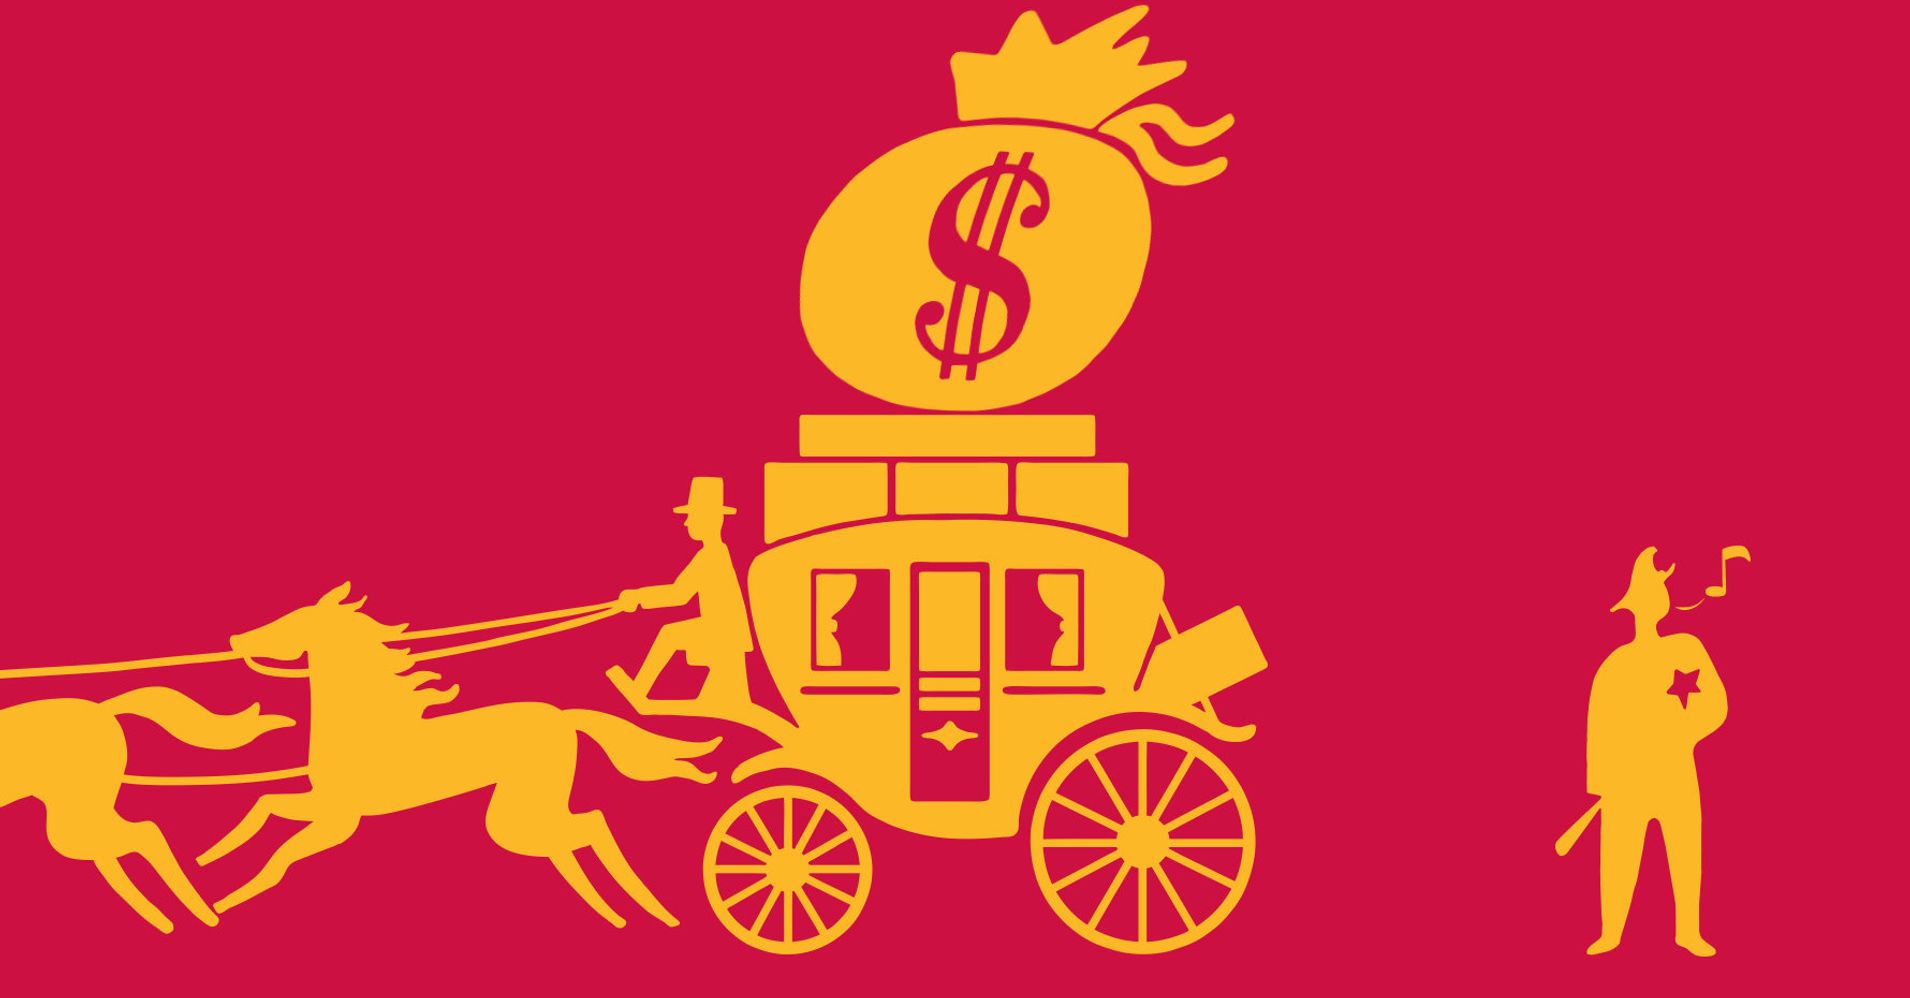 why-does-wells-fargo-still-exist-huffpost